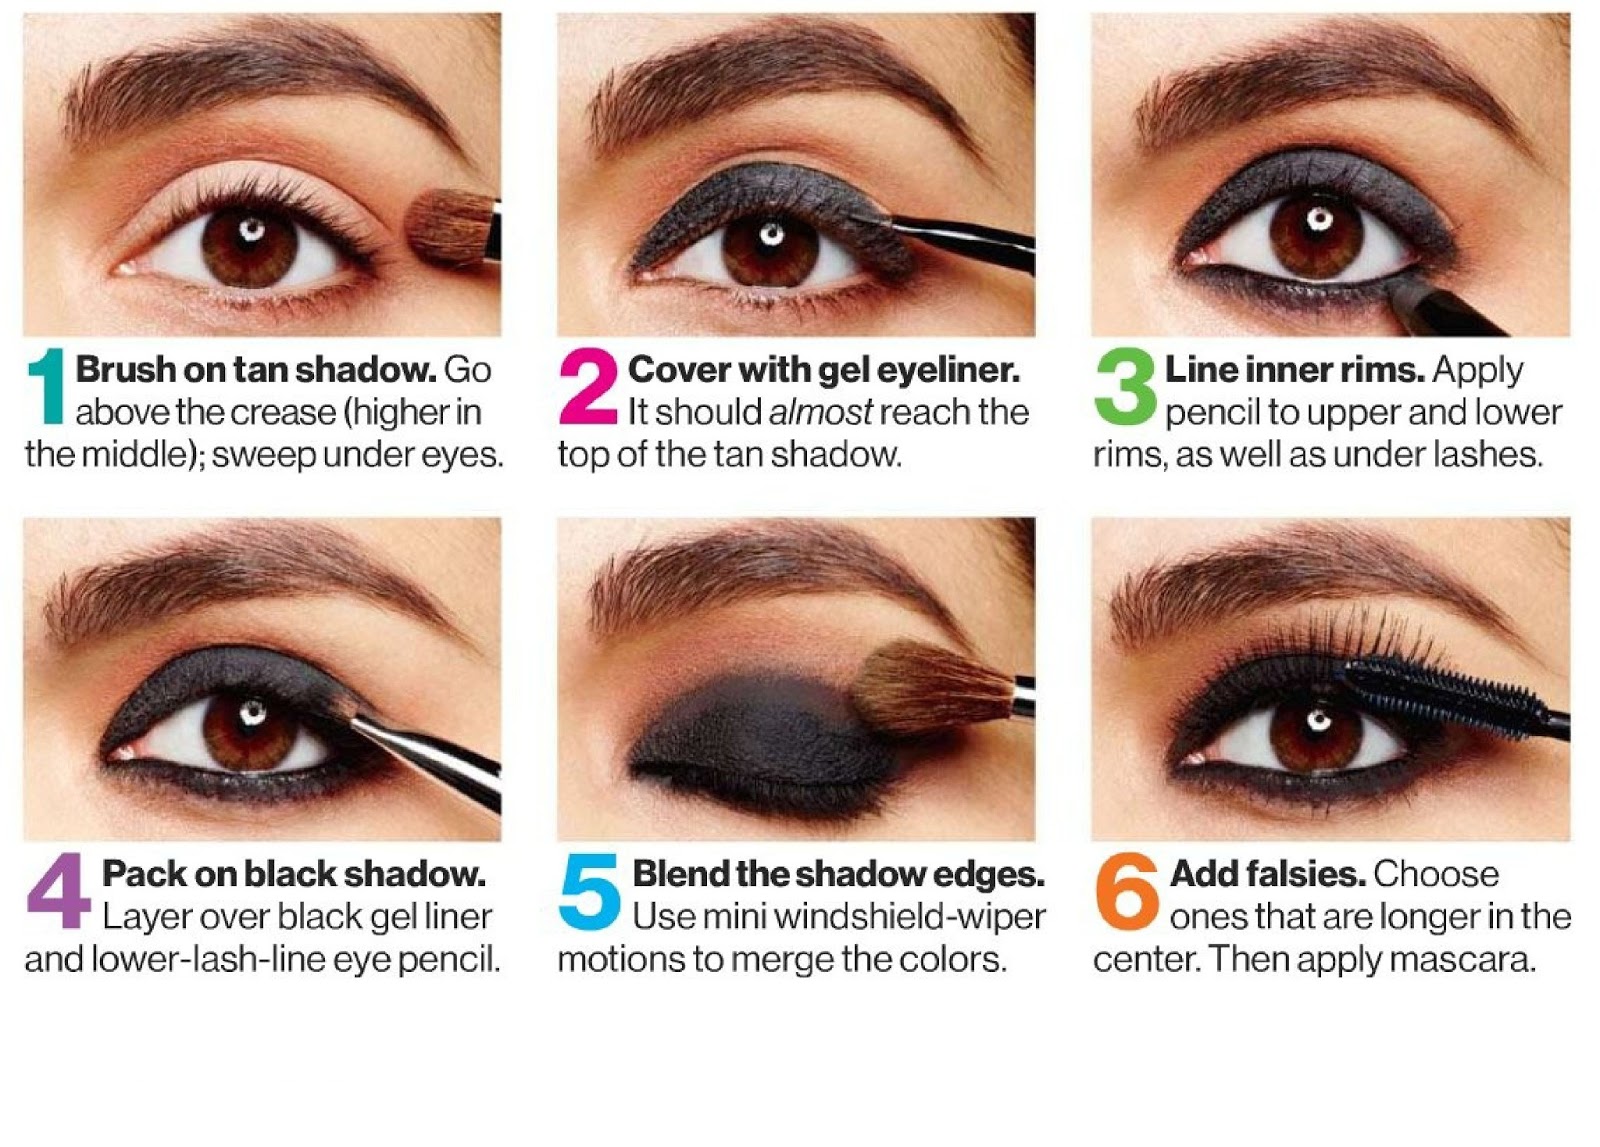 Makeup tips step by step